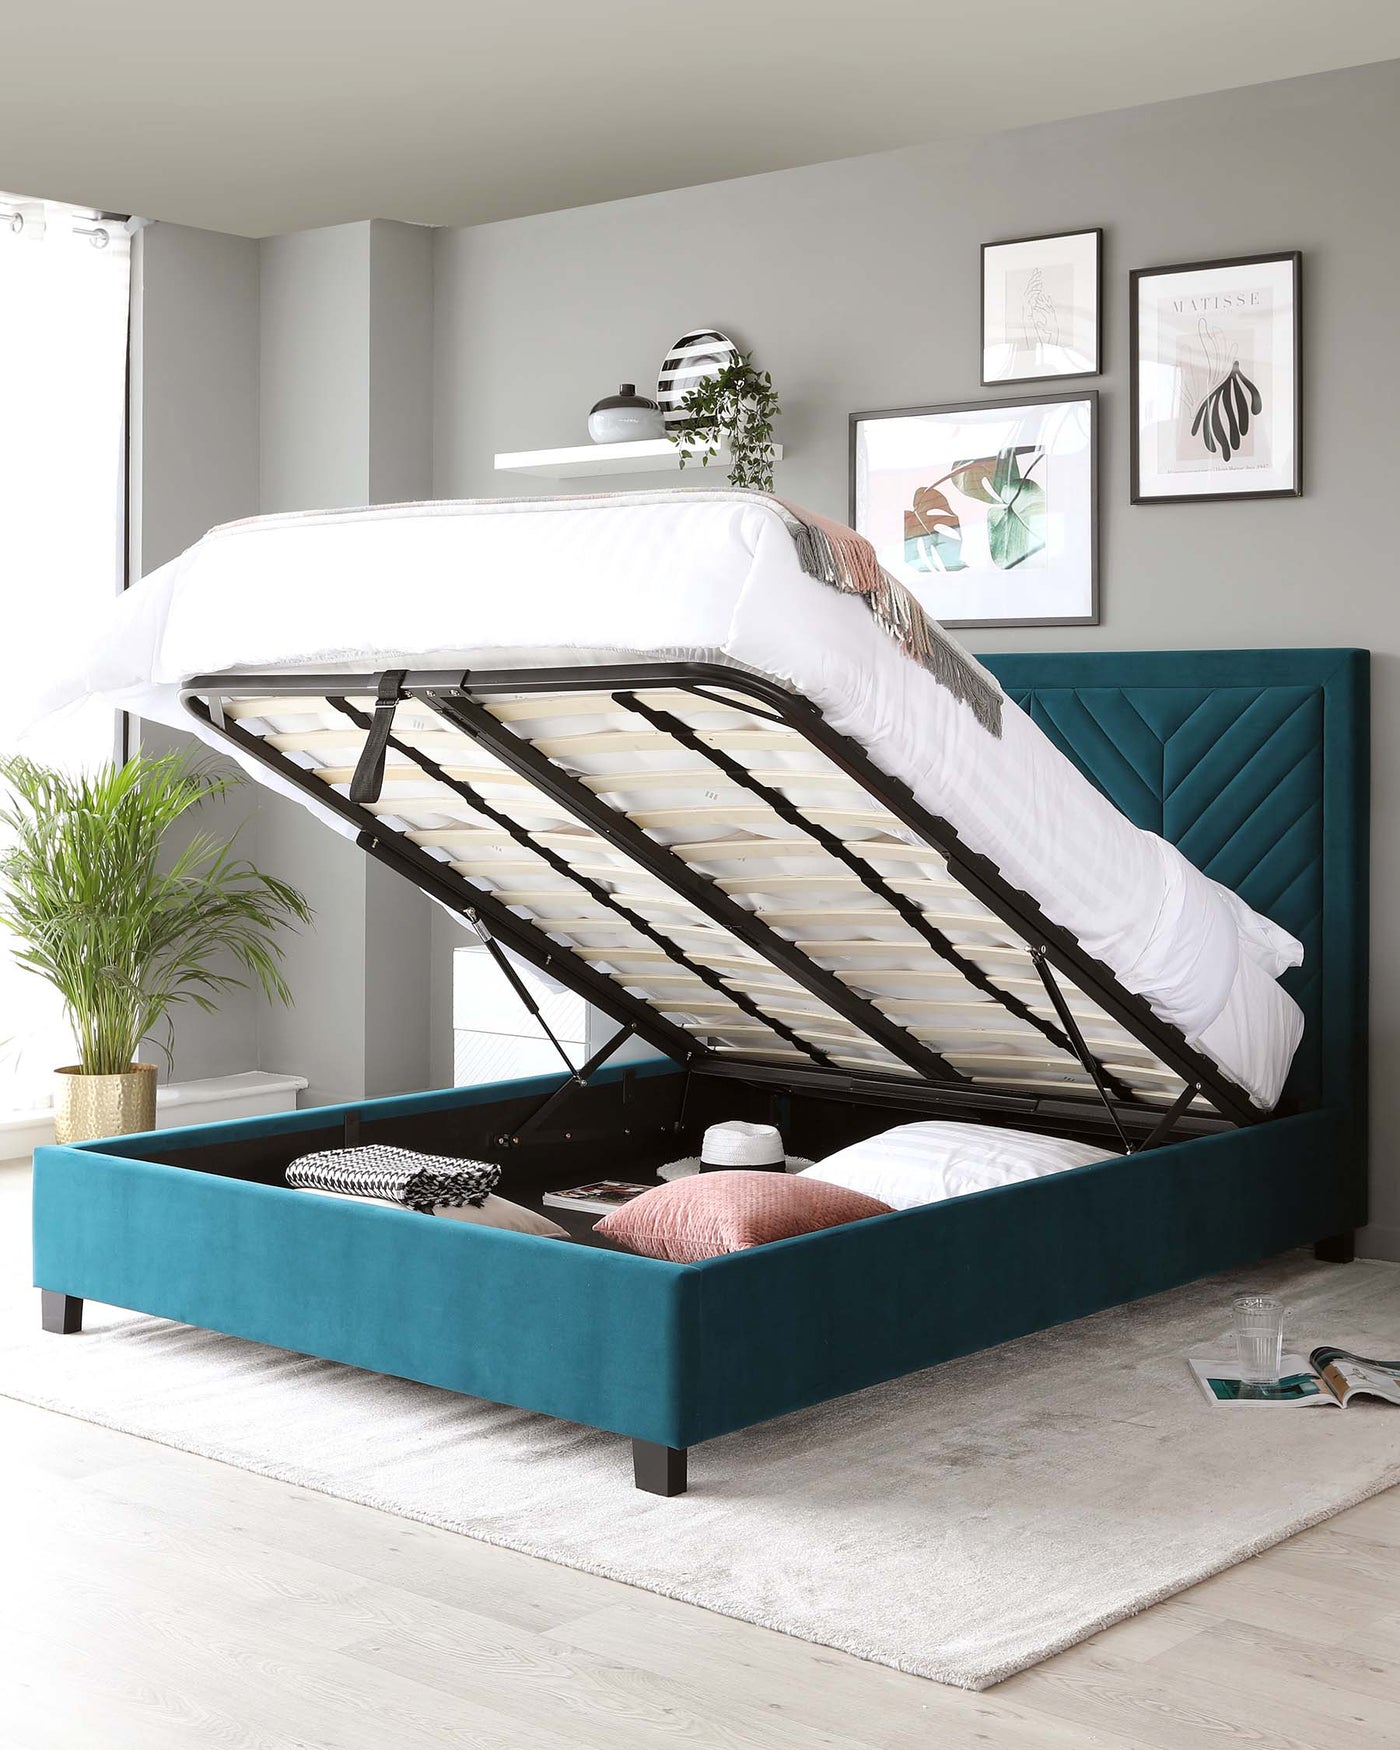 A contemporary teal upholstered storage bed with a lifted mattress revealing a spacious storage compartment underneath. The bed features a tufted headboard with a geometric design and is supported by dark wooden legs. A white mattress is partially visible, and beside the bed is a potted plant on a small stand. The room has a modern aesthetic with framed wall art and a minimalistic shelf above the bed.